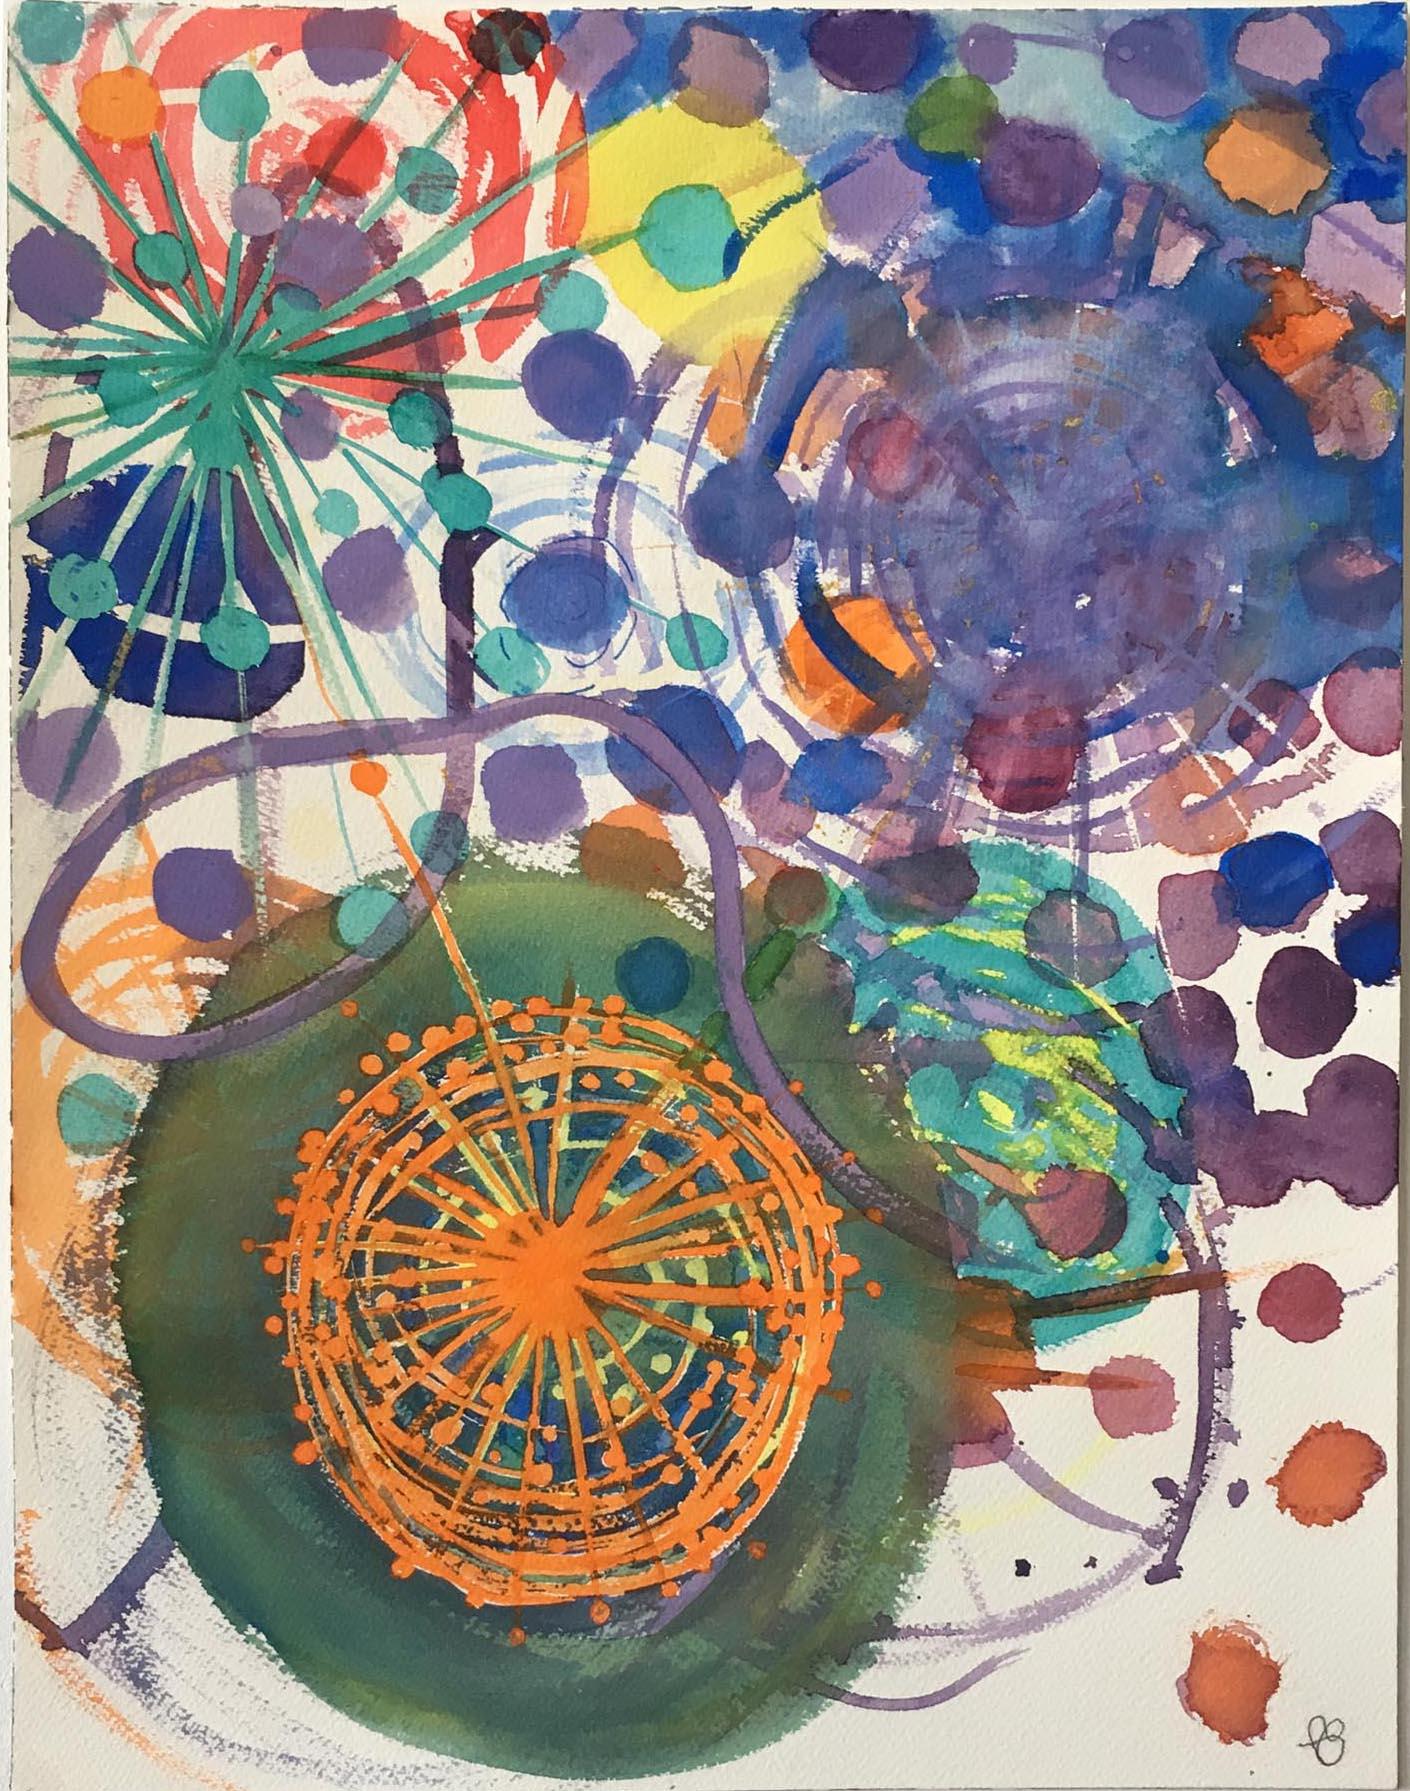 Fred Bendheim Abstract Drawing - "Worlds Fair" whirling shapes in purples and greens